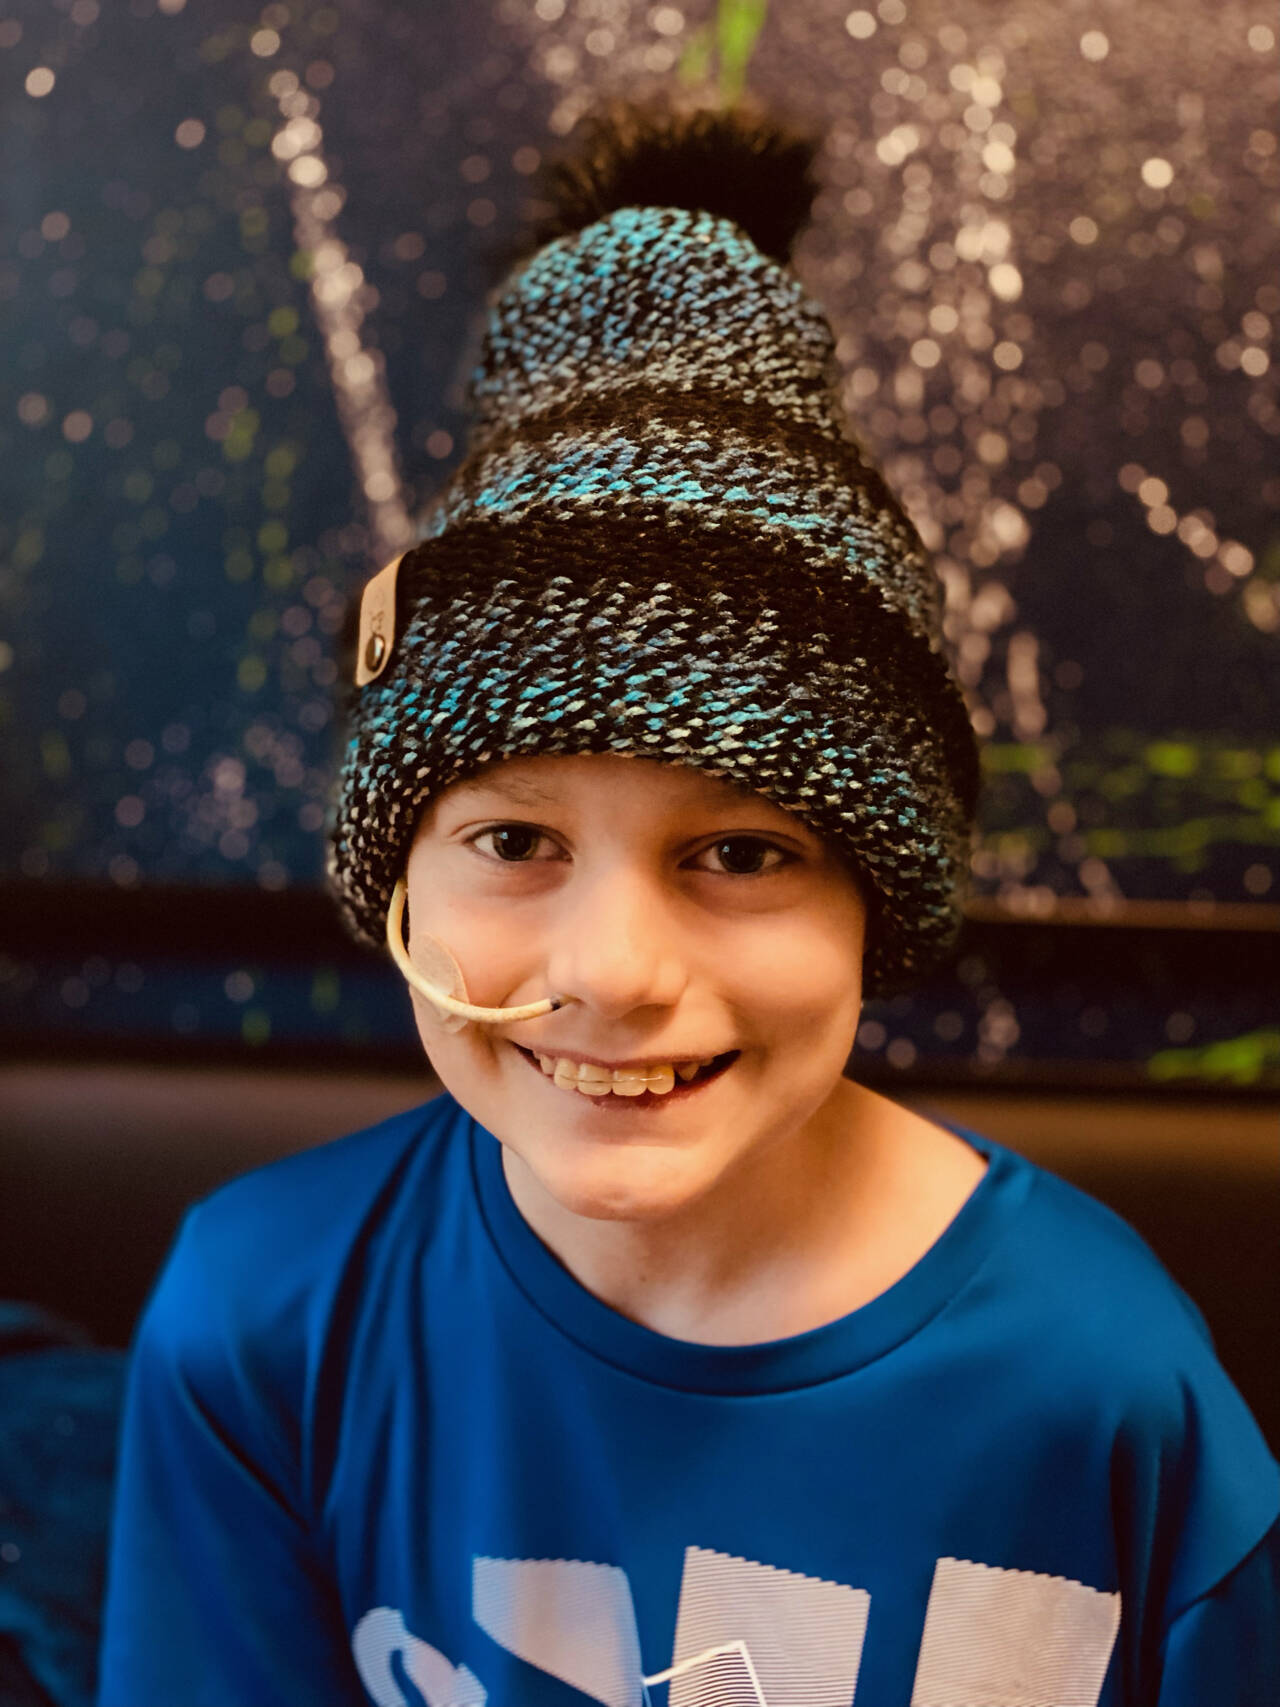 Ten-year-old Carter Pace smiles under one of Becca Pace’s knitted beanies which are available for sale at etsy.com/shop/HugYourHead and the Southern Nibble food truck. Proceeds from sales are used for supplies for Pace to knit beanies for free distribution at Seattle’s Children’s Hospital, where Carter is being treated for medulloblastoma, a brain cancer that primarily affects children ten and under. Beanies ordered on etsy are delivered free in the Sequim area. Photo courtesy of Becca Pace